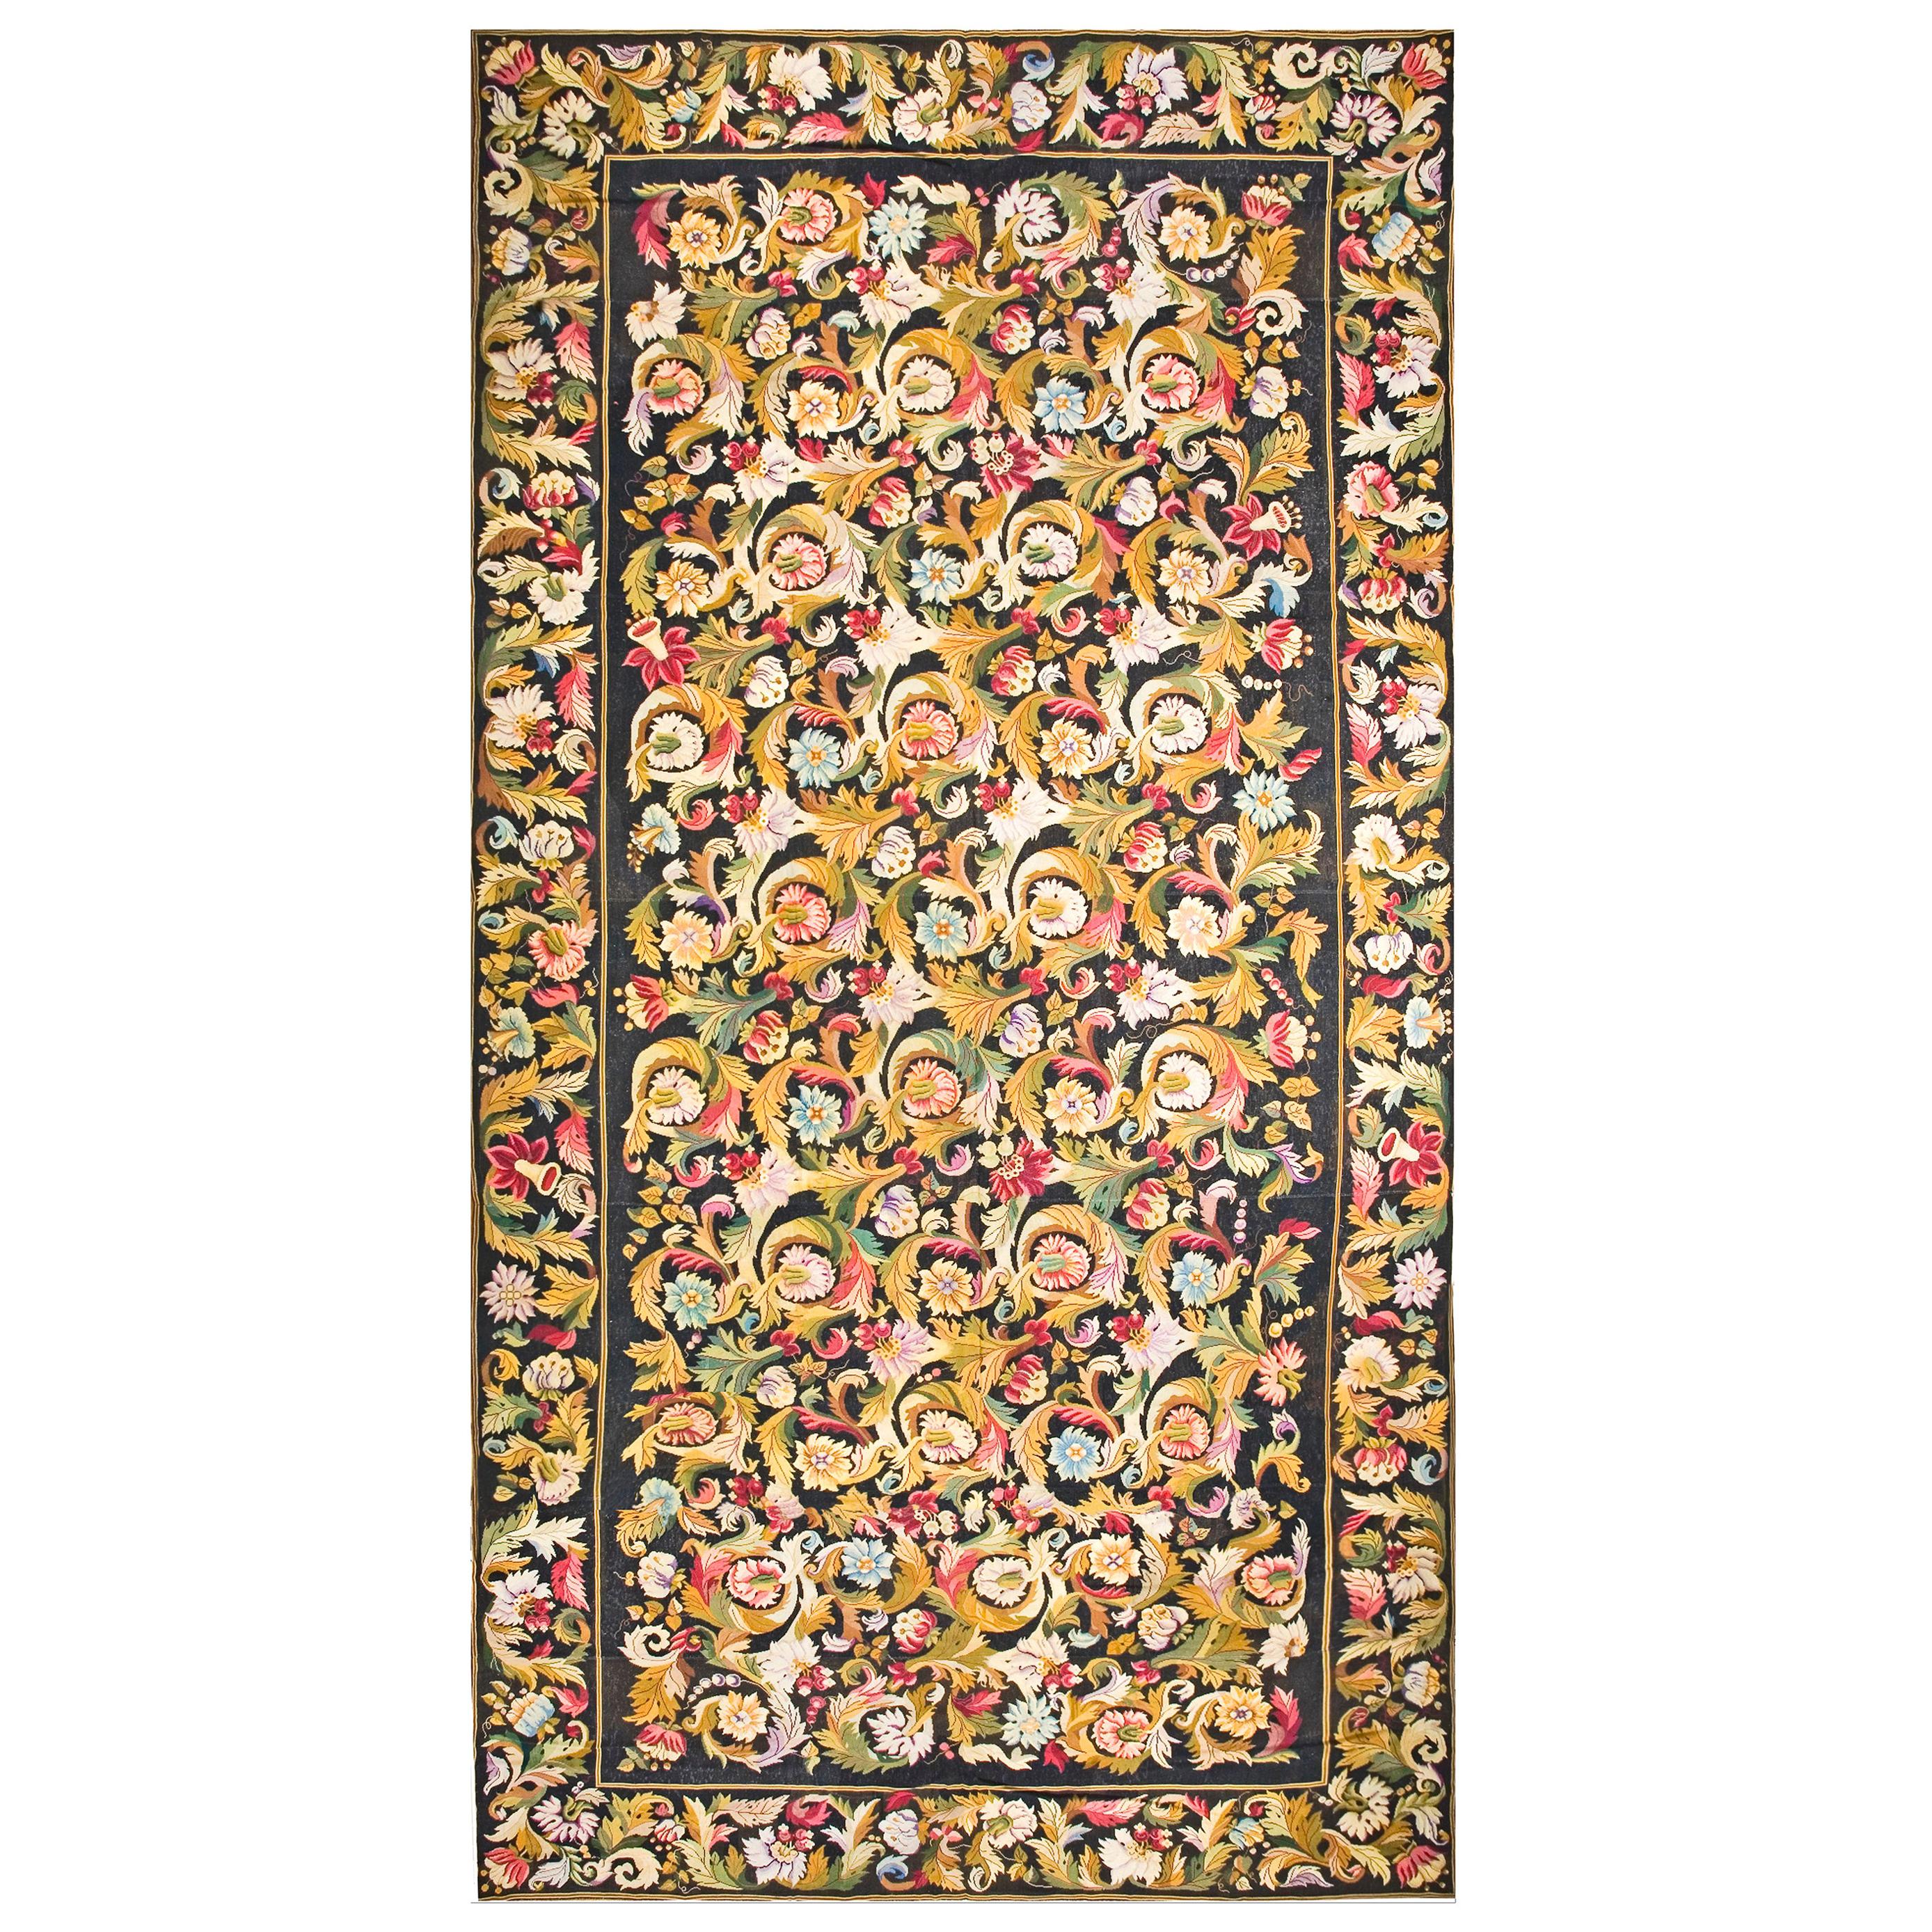 Late 19th Century French Needlepoint Carpet ( 10'6" X 24'9" - 320 x 754 )